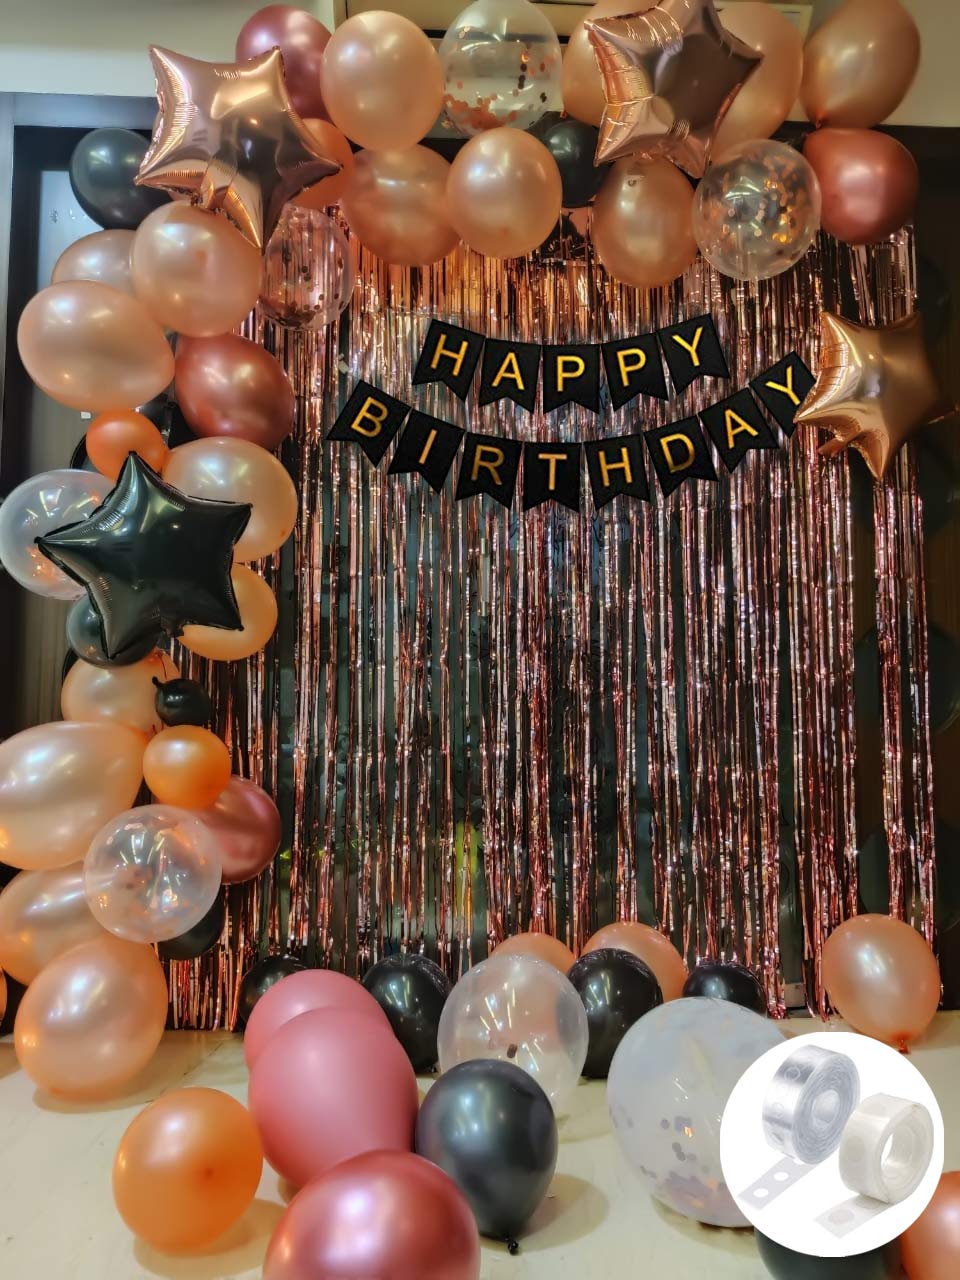 Party Propz Happy Birthday Decoration Kit Combo 57Pcs for Silver and Golden  HBD Letter Foil Balloons Heart Foil Kids Adults 40th 50th 60th Theme Dcor/Happy  Birthday Decoration Items Set : Amazon.in: Toys